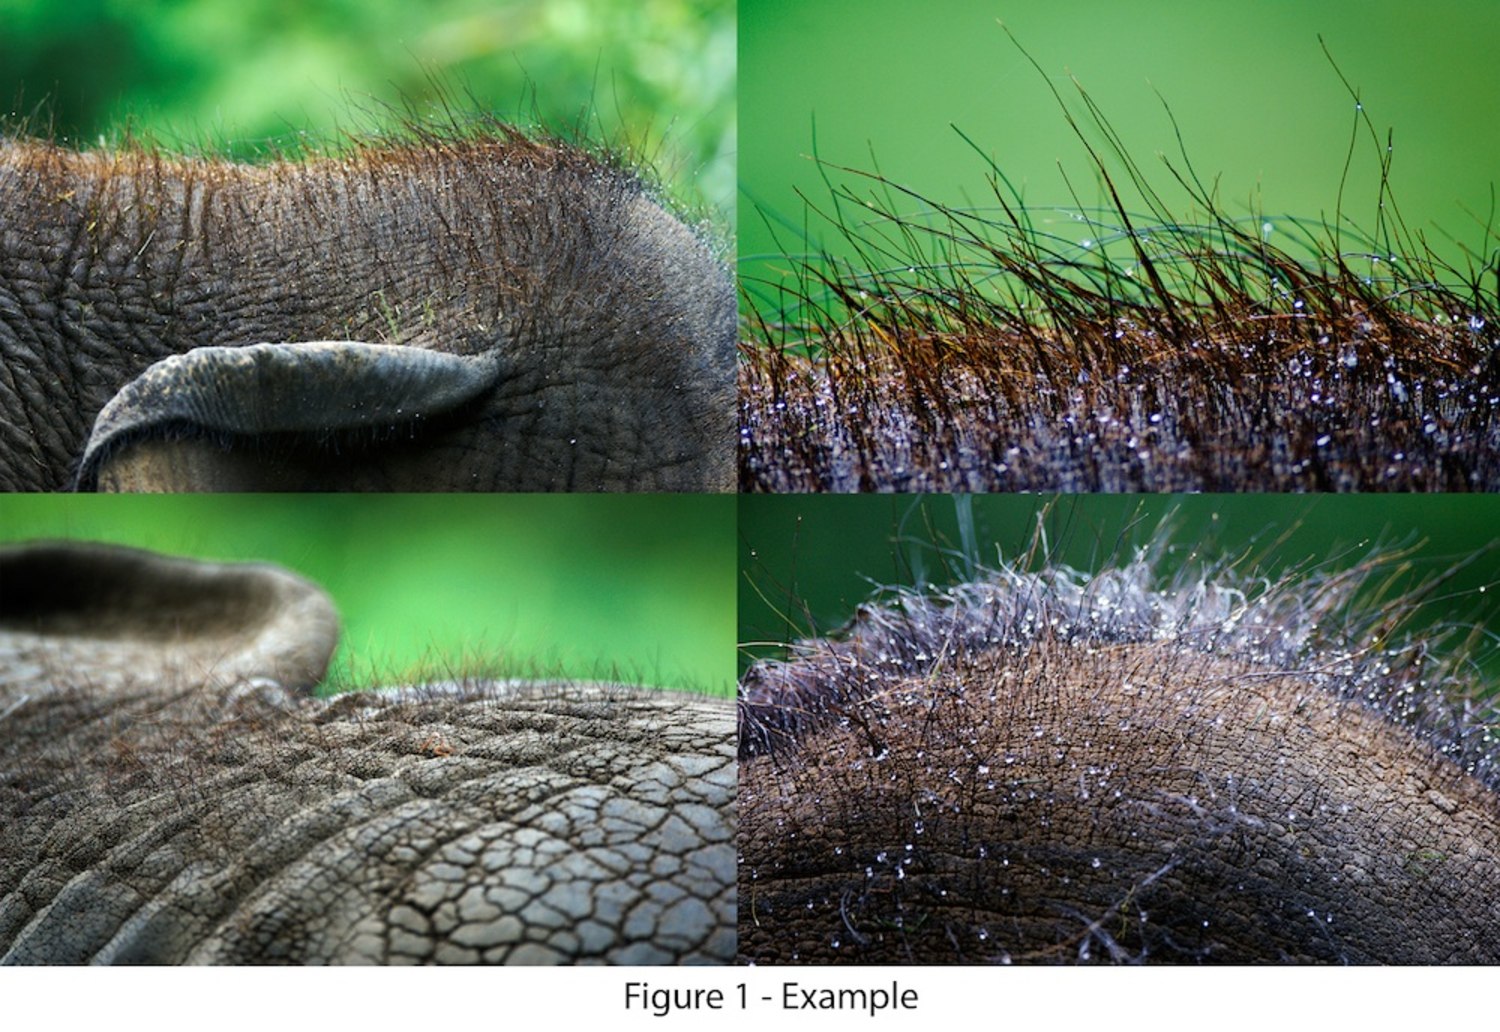 Why do elephants have bristly hair? To keep them cool